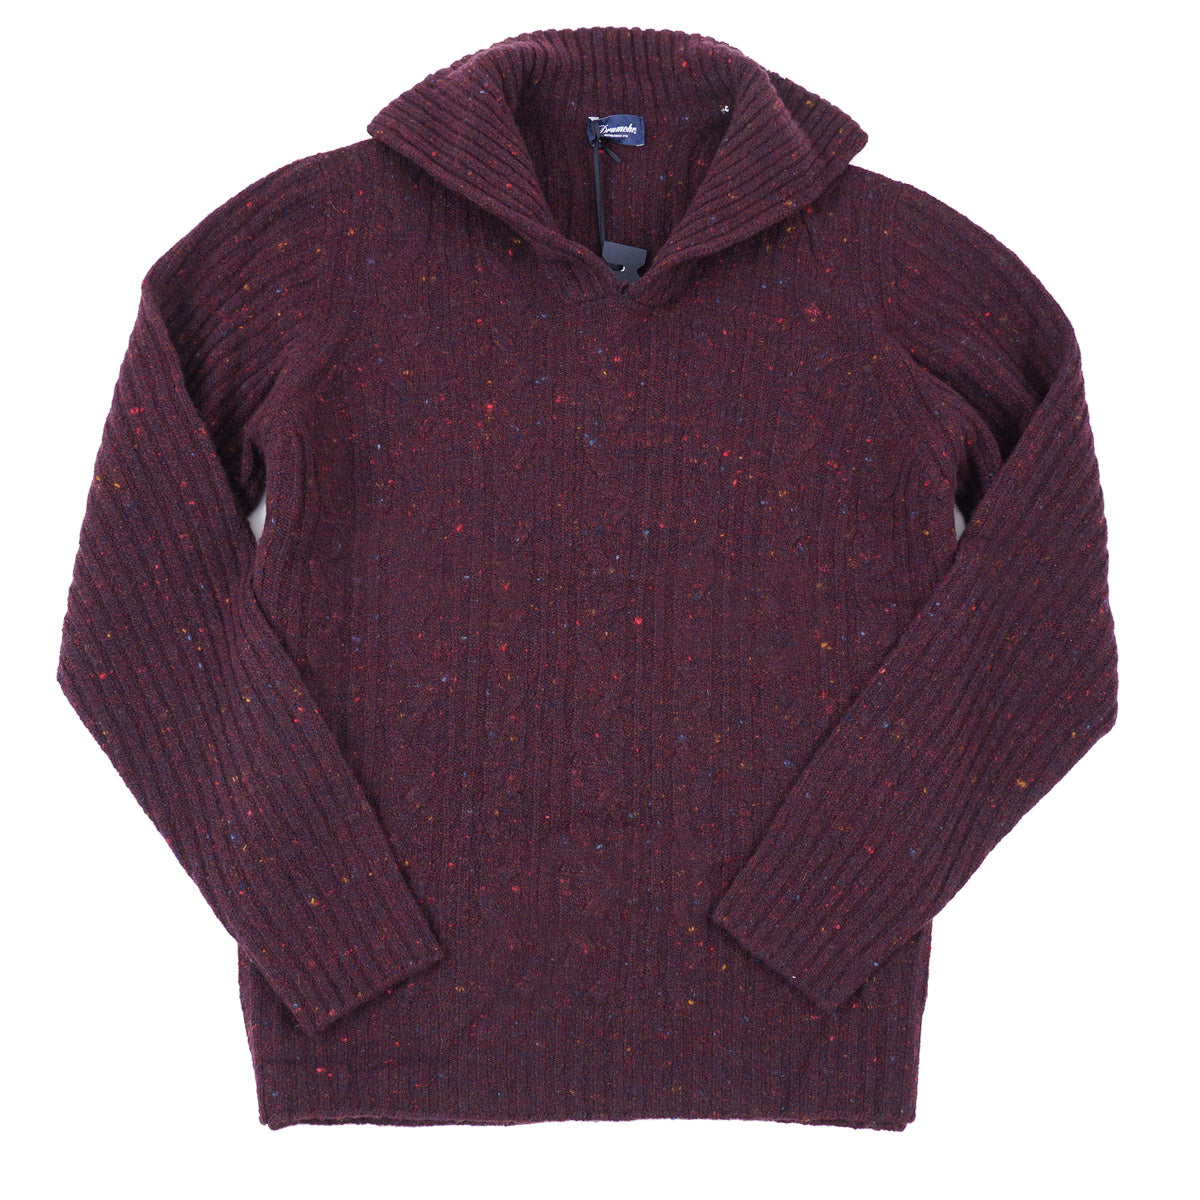 Drumohr Cable Knit Wool-Cashmere Sweater - Top Shelf Apparel